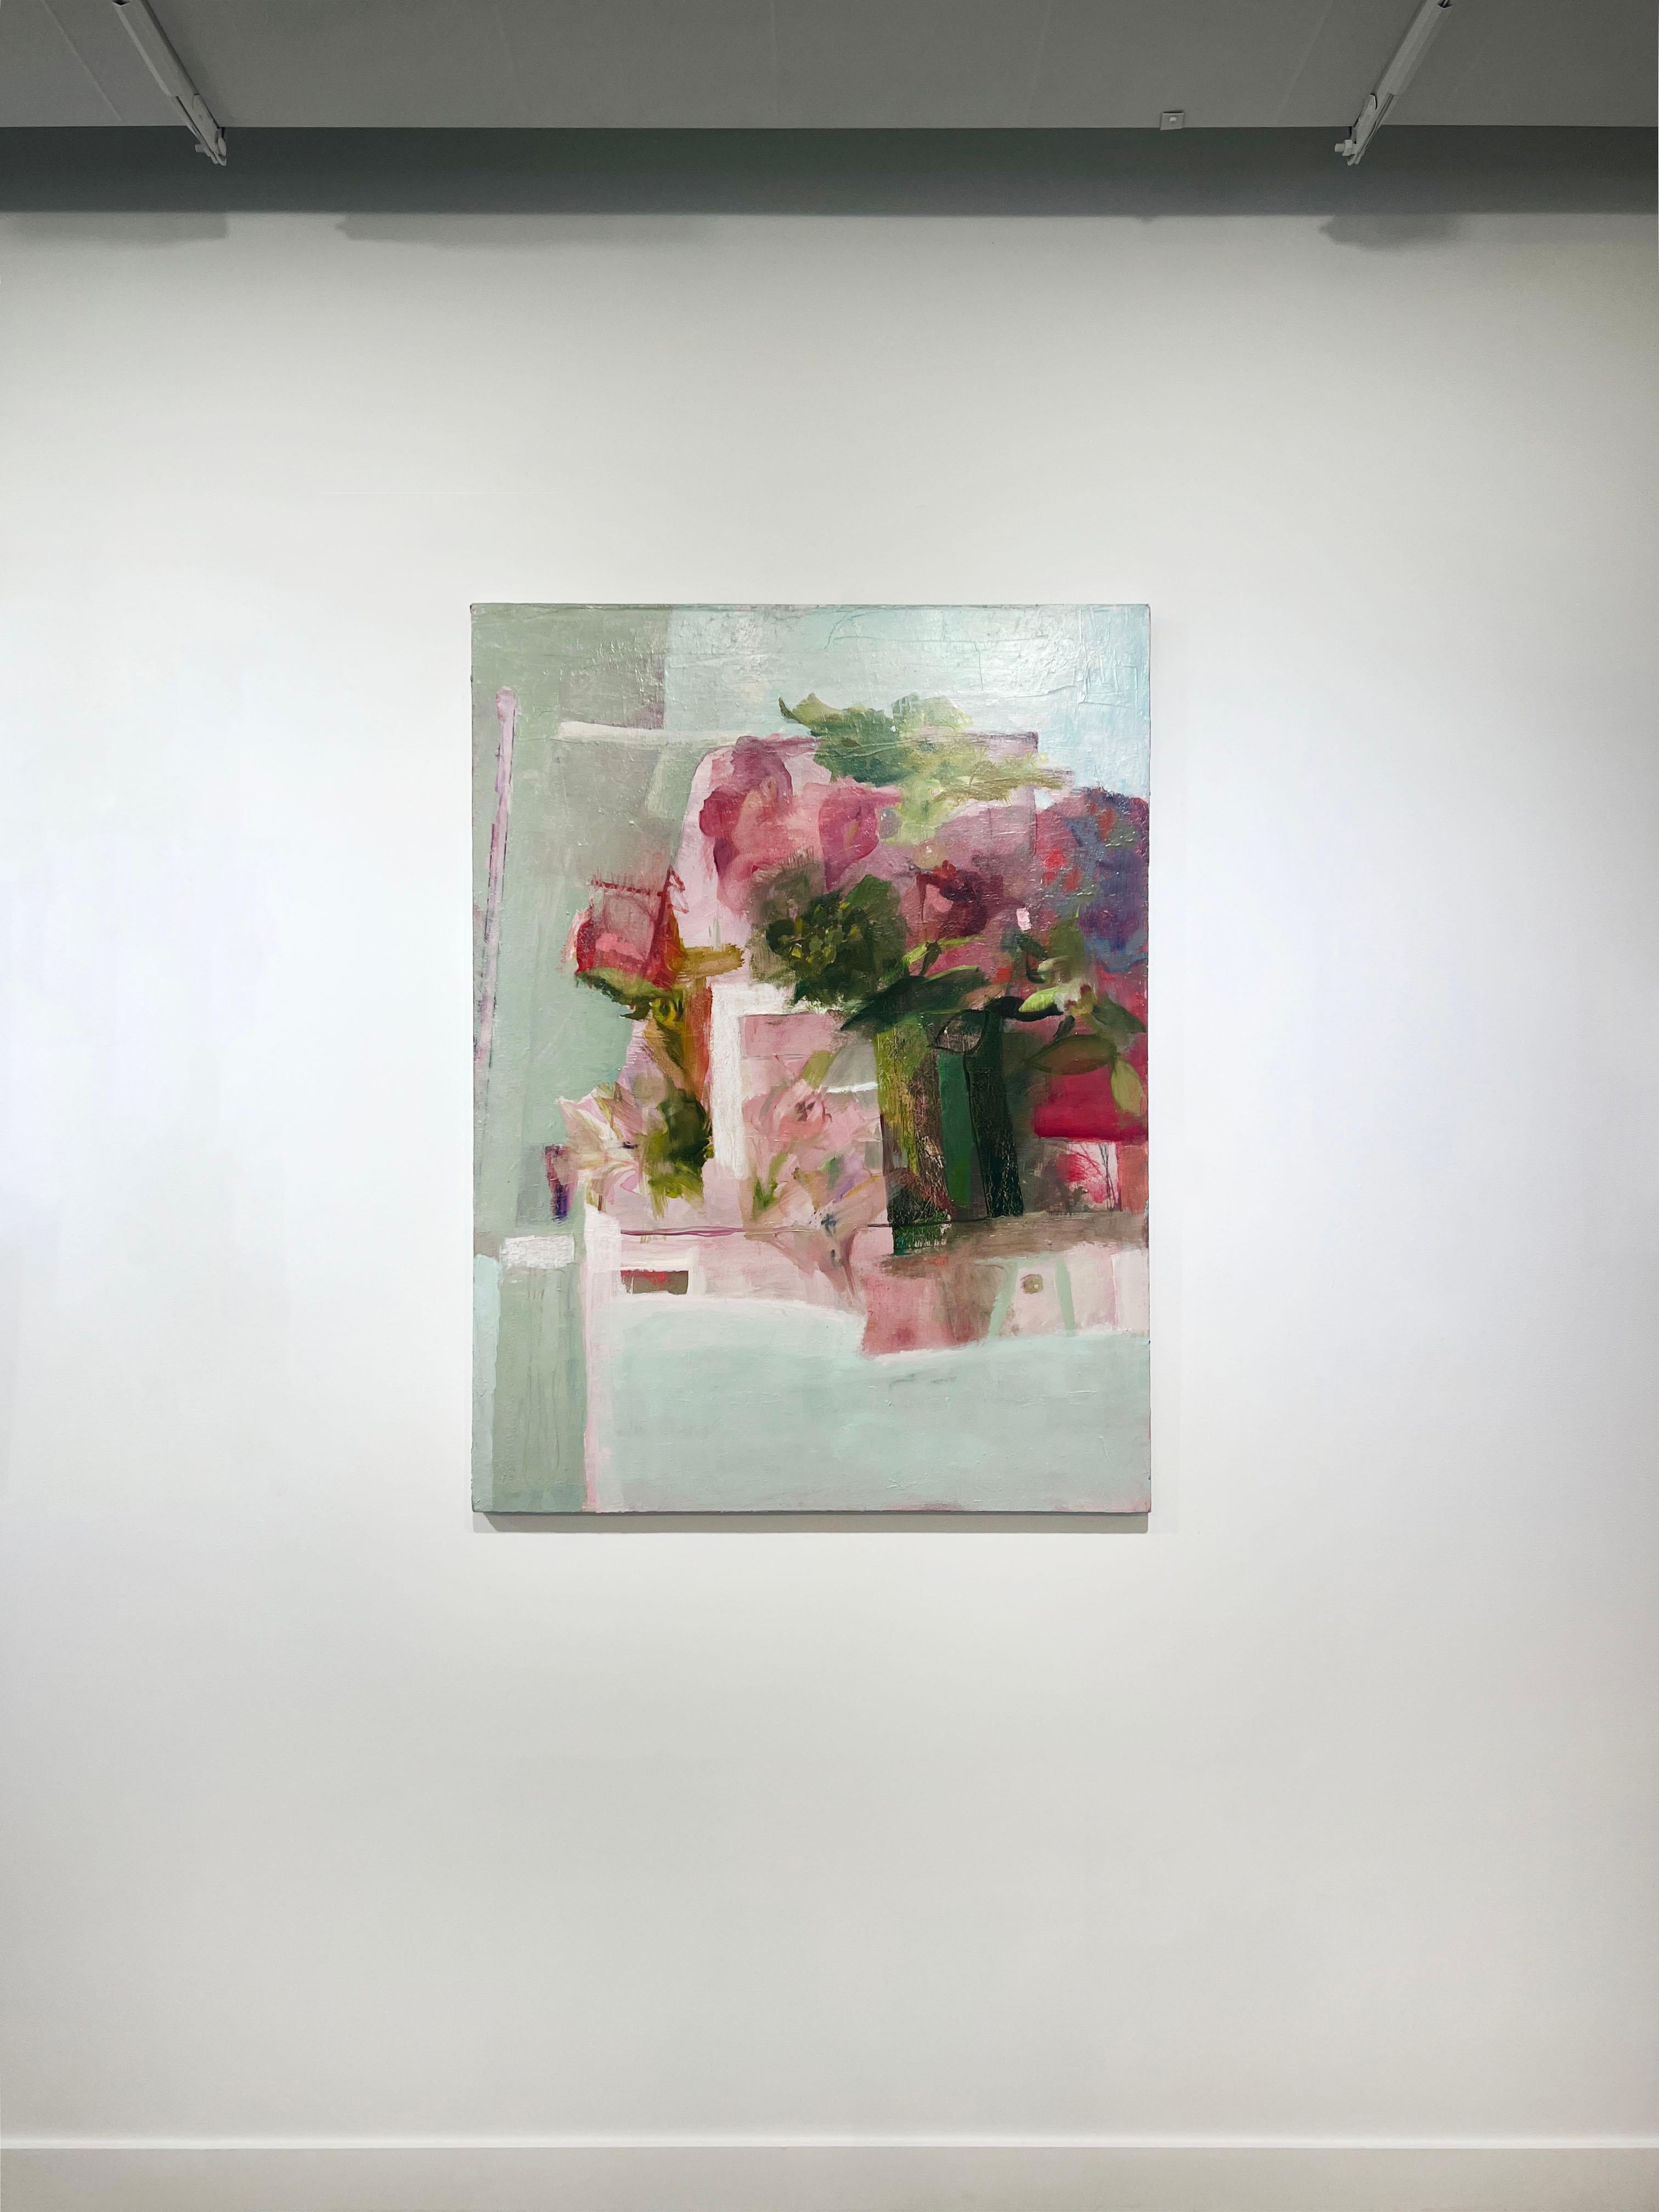 This abstracted floral painting by Christine Averill-Green is made with oil paint and gouache on gallery-wrapped canvas. It features a light, pastel palette, with varying green and pink tones applied in light, almost washy layers. The painting is